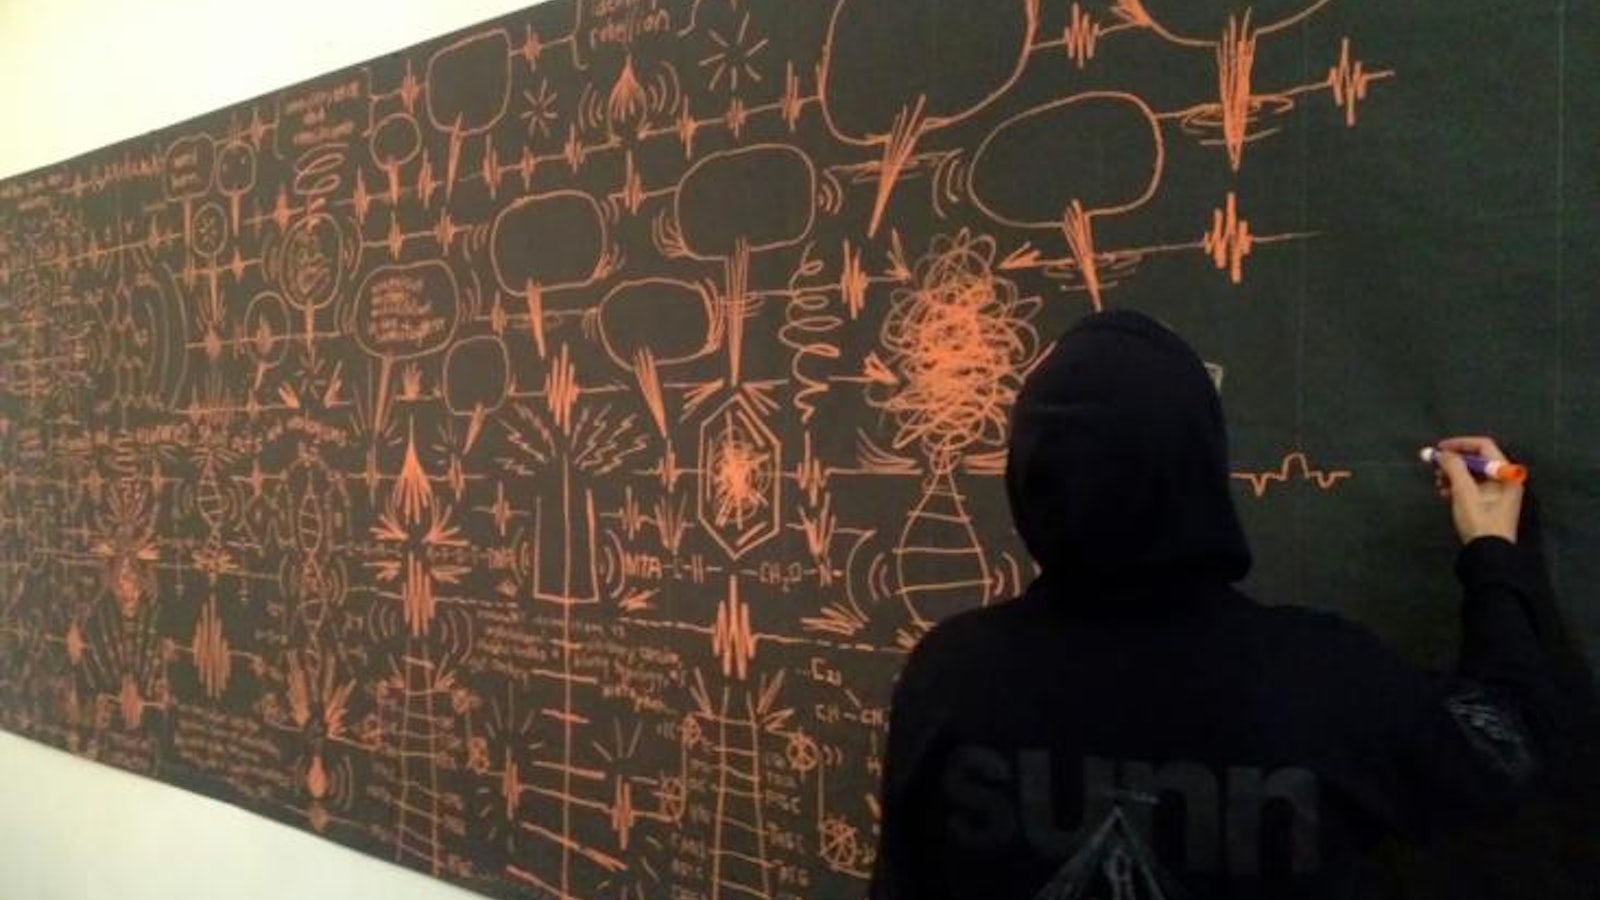 1. EKG. The artist draws at Pandemic gallery, 2013. Courtesy of the gallery.